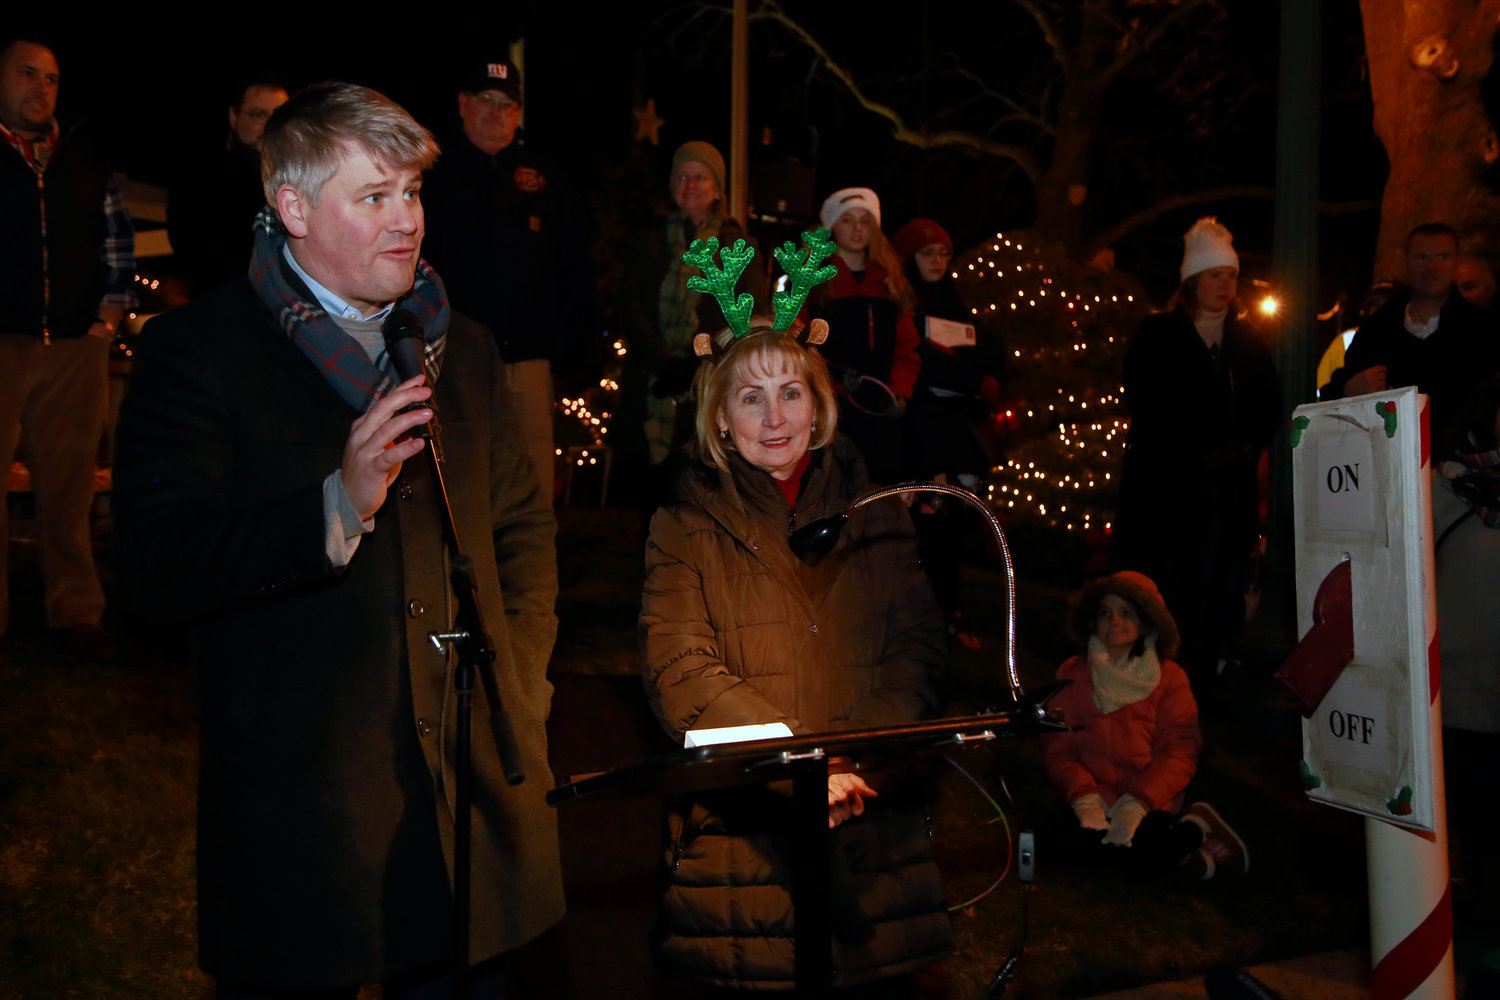 Village of Malverne plans to hold holiday events in December Herald